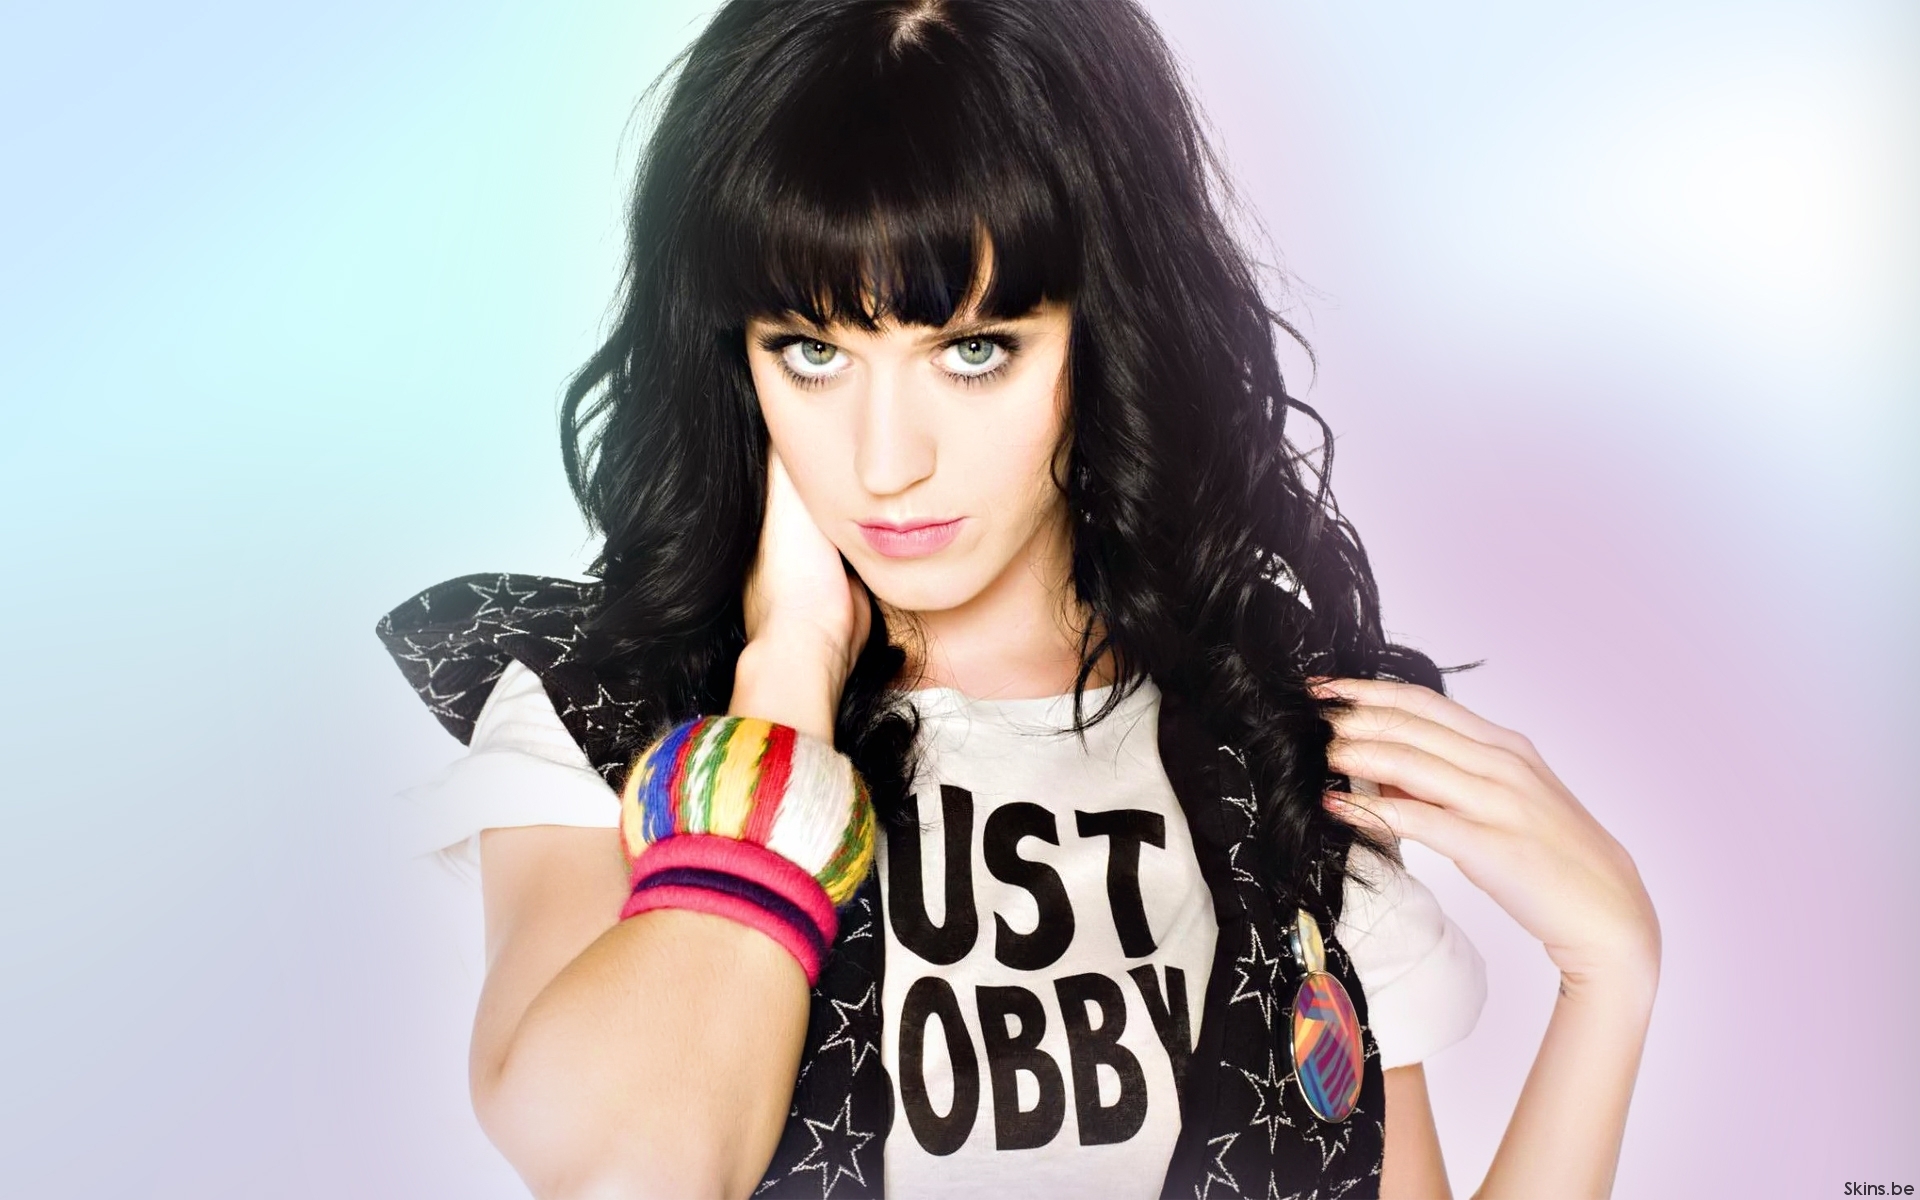 Katy Perry Iphone Wallpapers